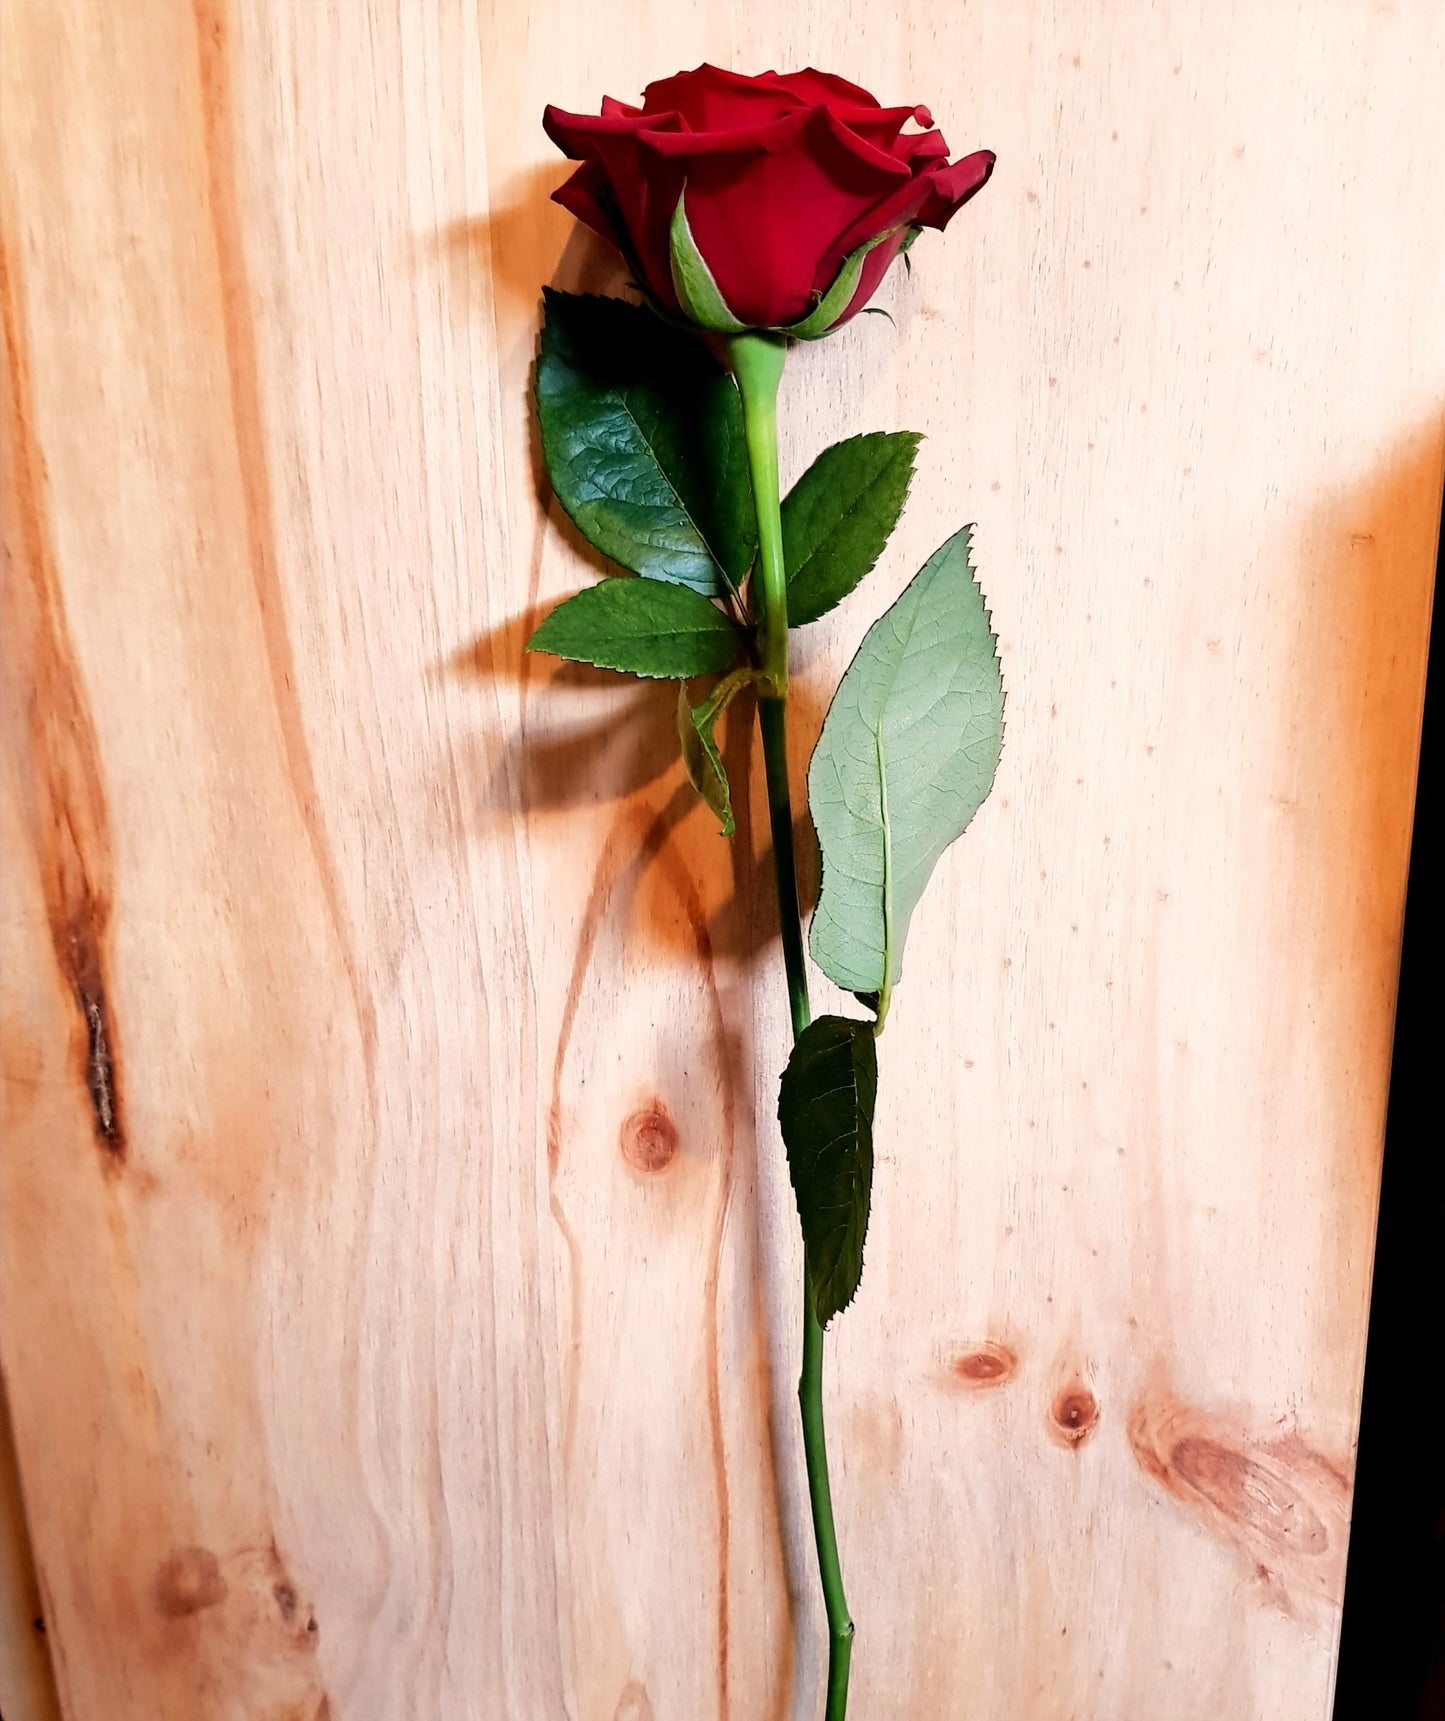 Picture of beautiful red rose with long stem laying on wood